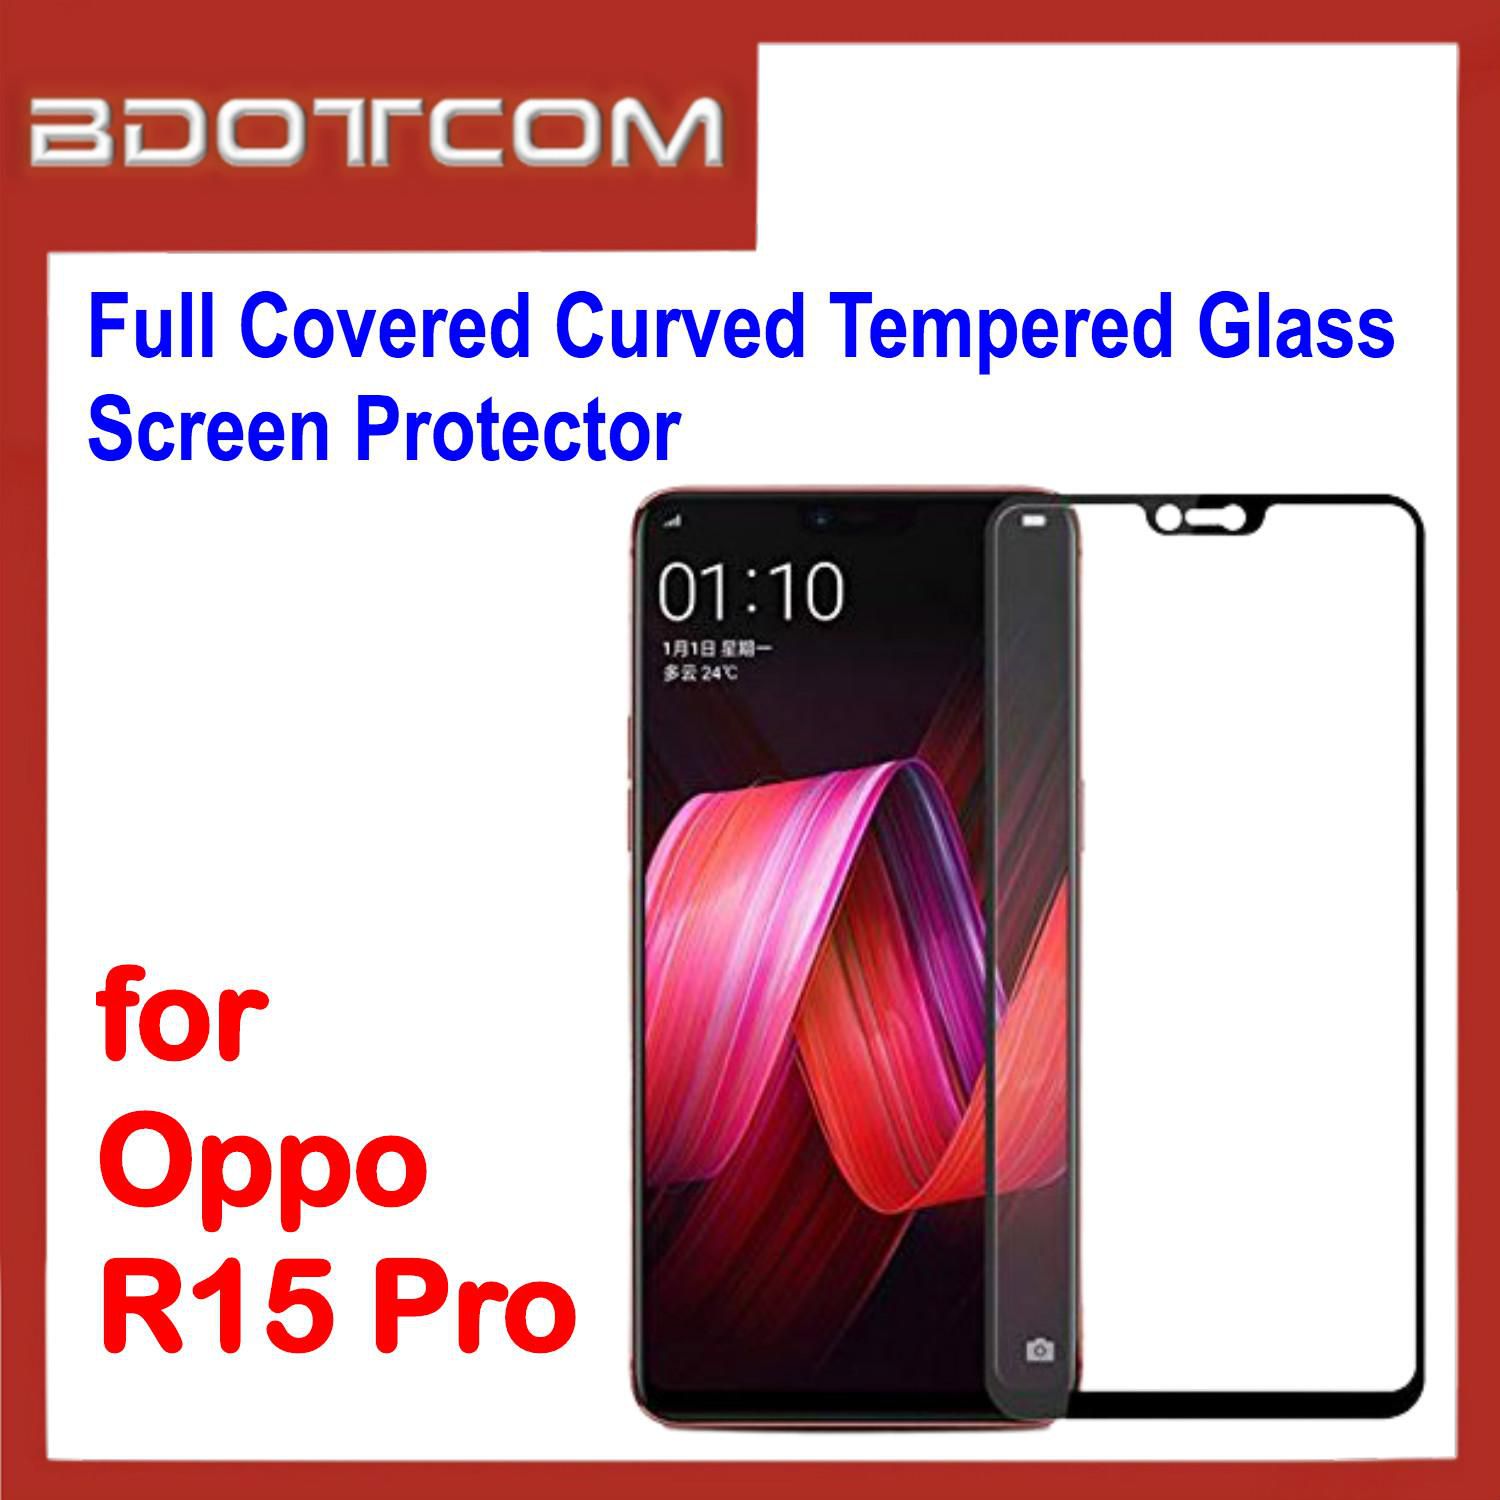 Bdotcom Full Covered Curved Glass Screen Protector for Oppo R15 Pro (Black)